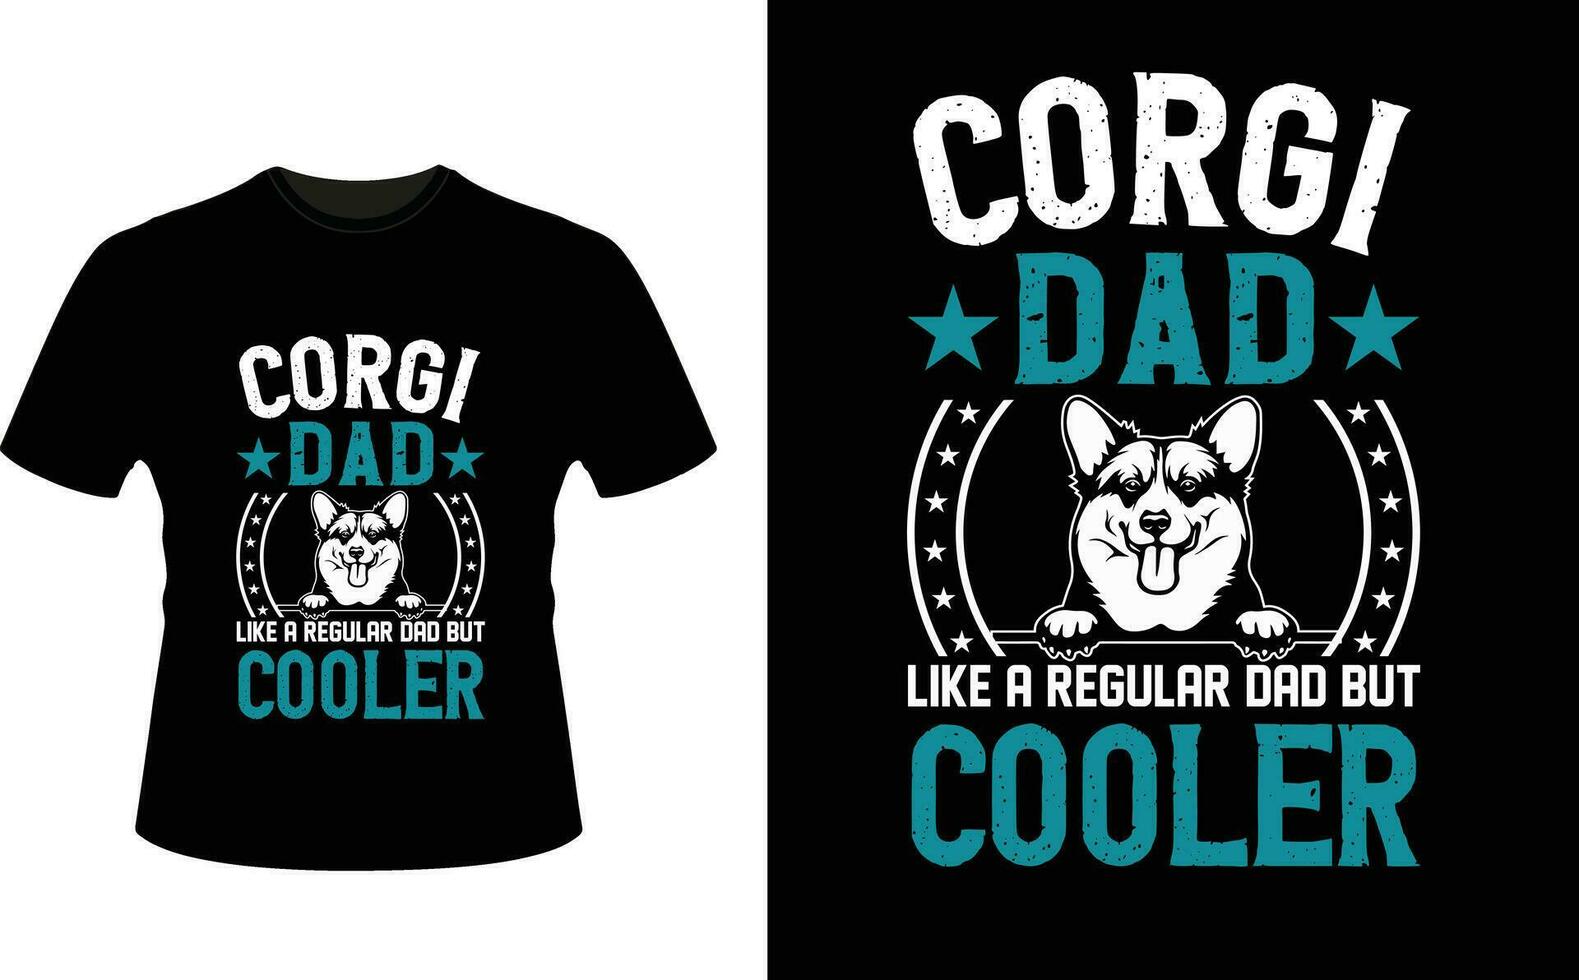 Cargi Dad Like a Regular Dad But Cooler or dad papa tshirt design or Father day t shirt Design vector